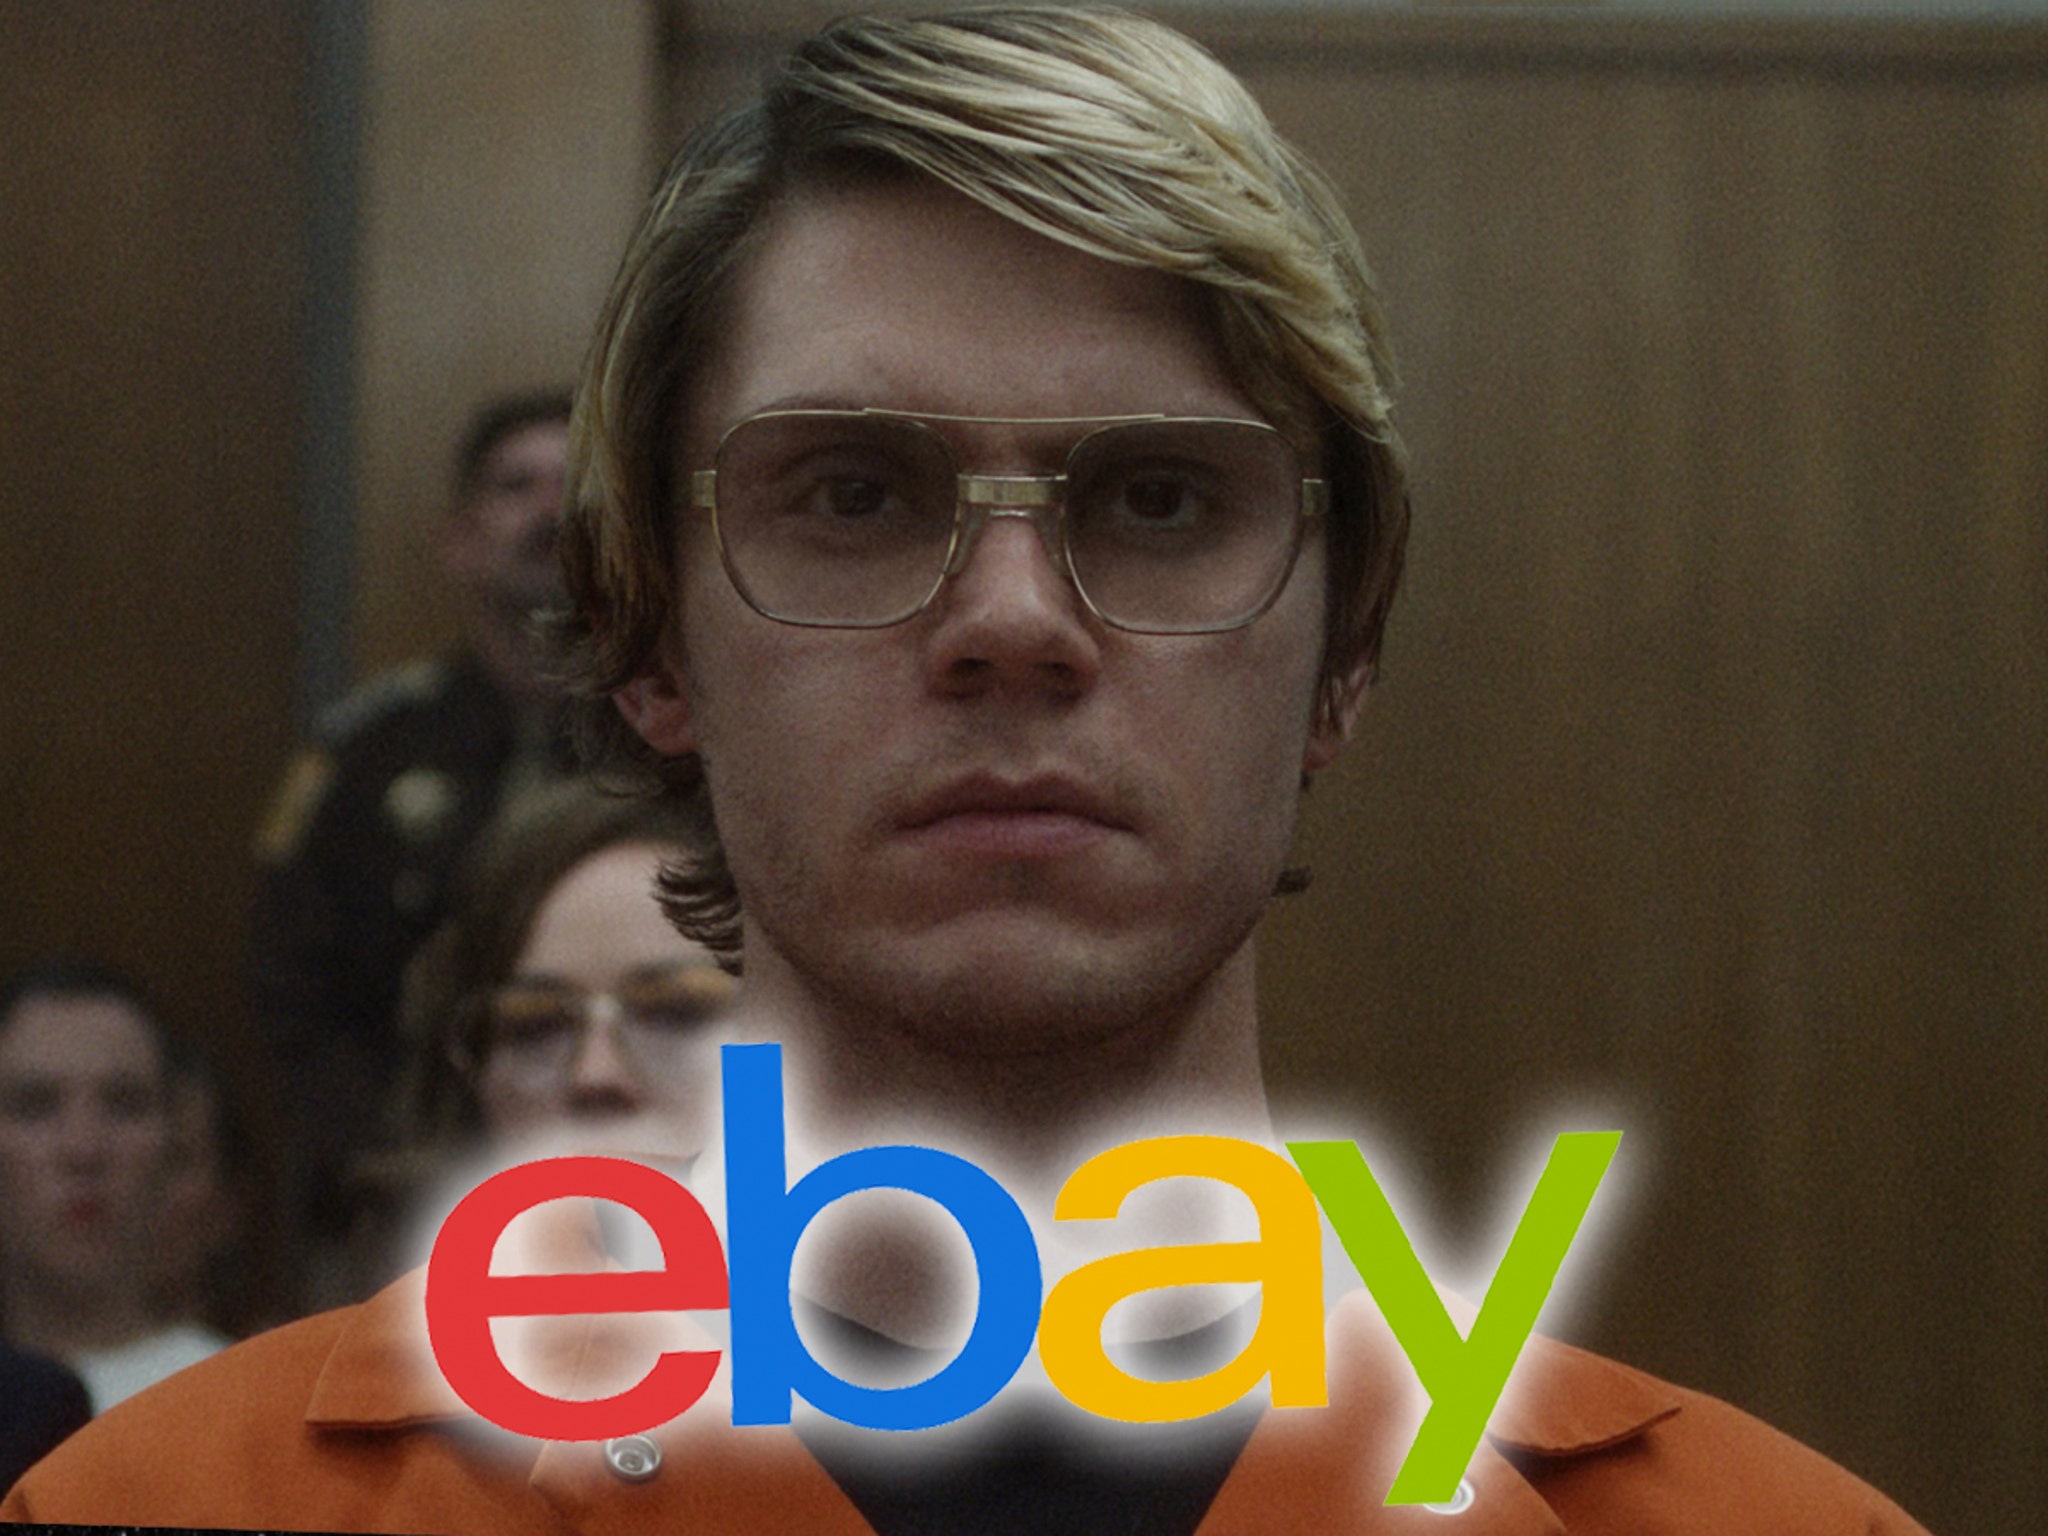 Jeffrey Dahmer-Inspired Clothes Sold on eBay For Halloween Despite Outrage